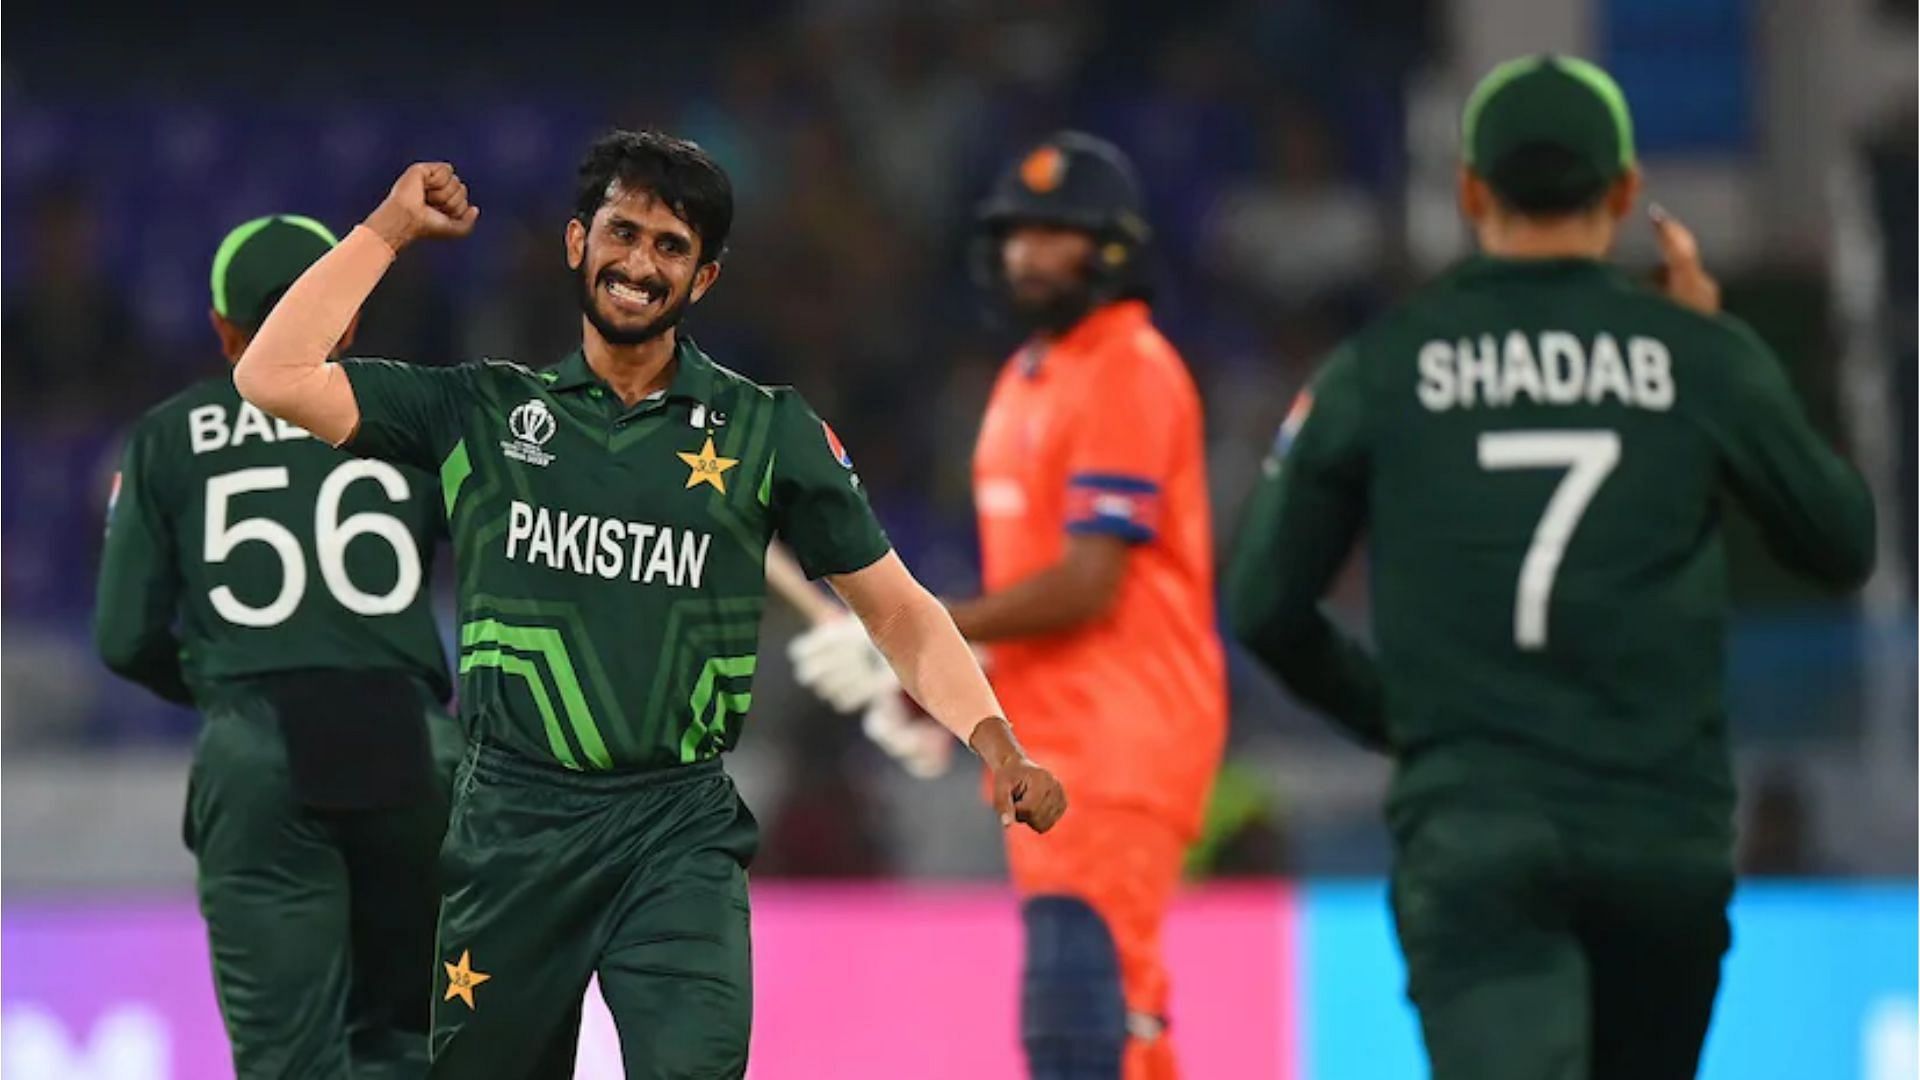 Hasan Ali bowled economically and accurately against the Netherlands.